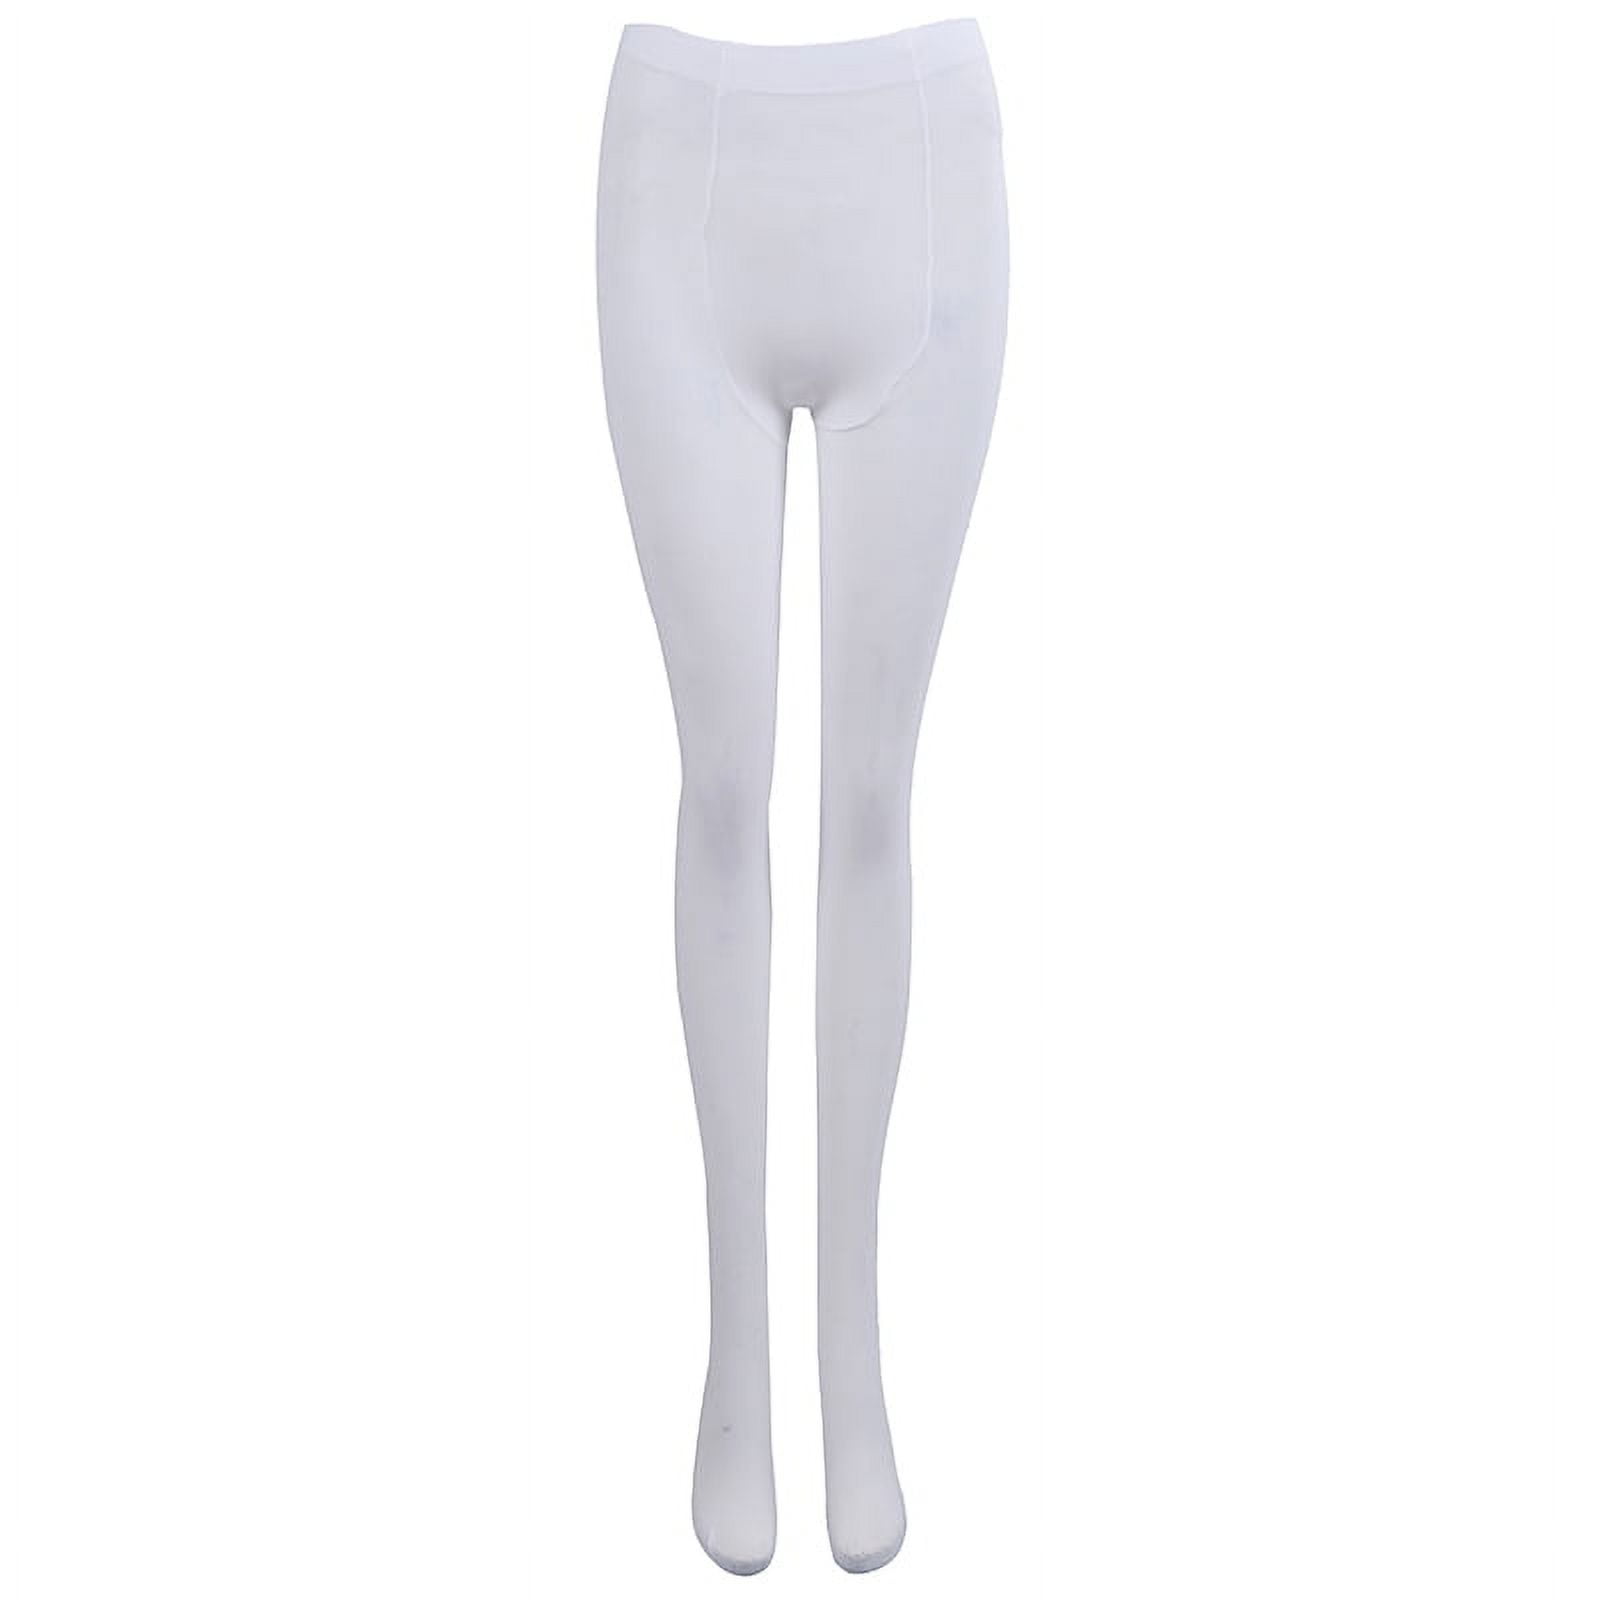 White Solid Color Pantyhose For Women - Walmart.com